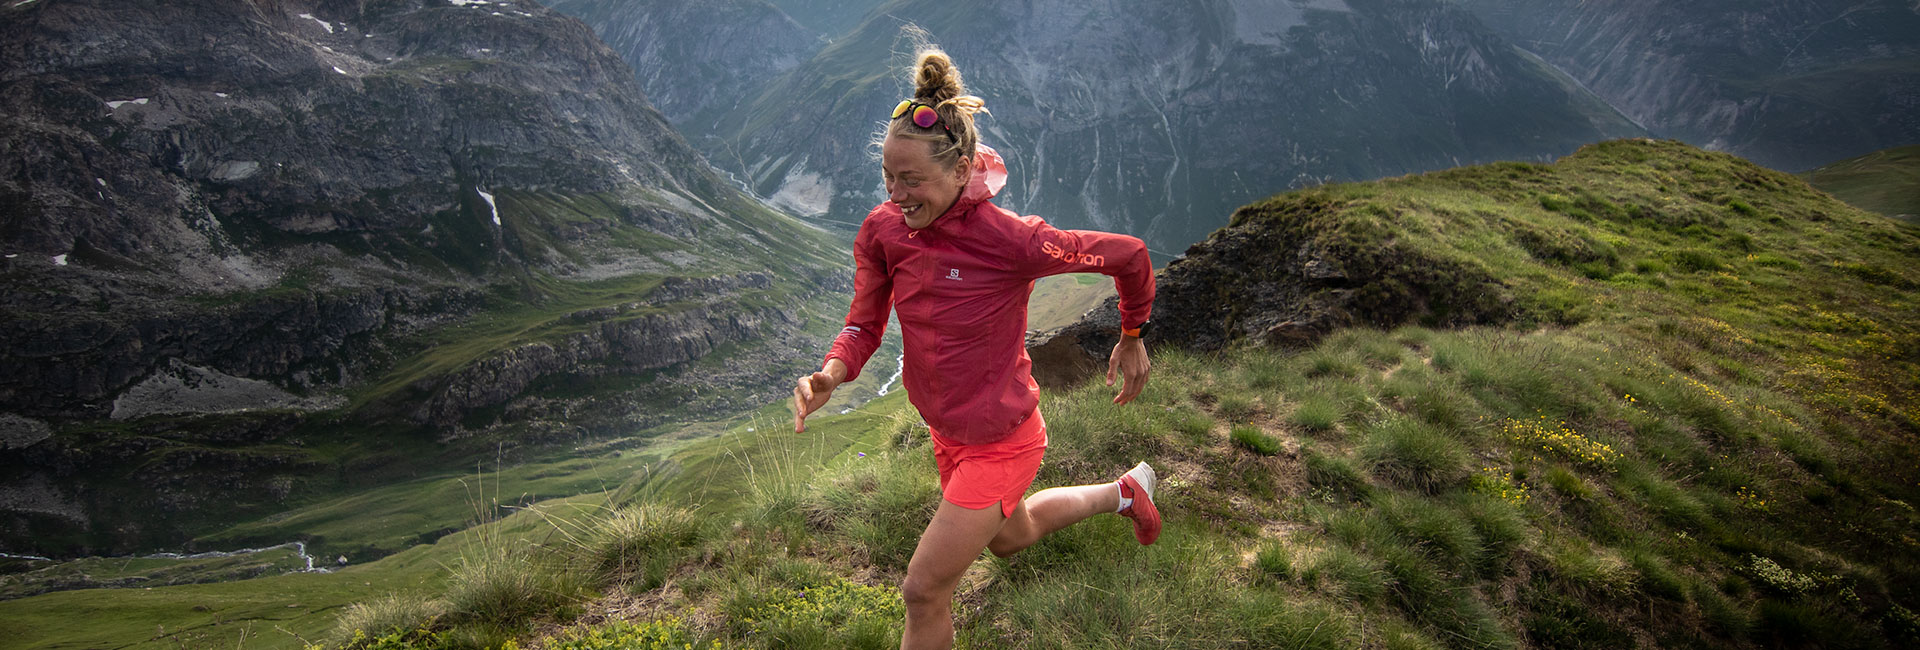 10 Trail Running Tips For Beginners - Trail to Summit